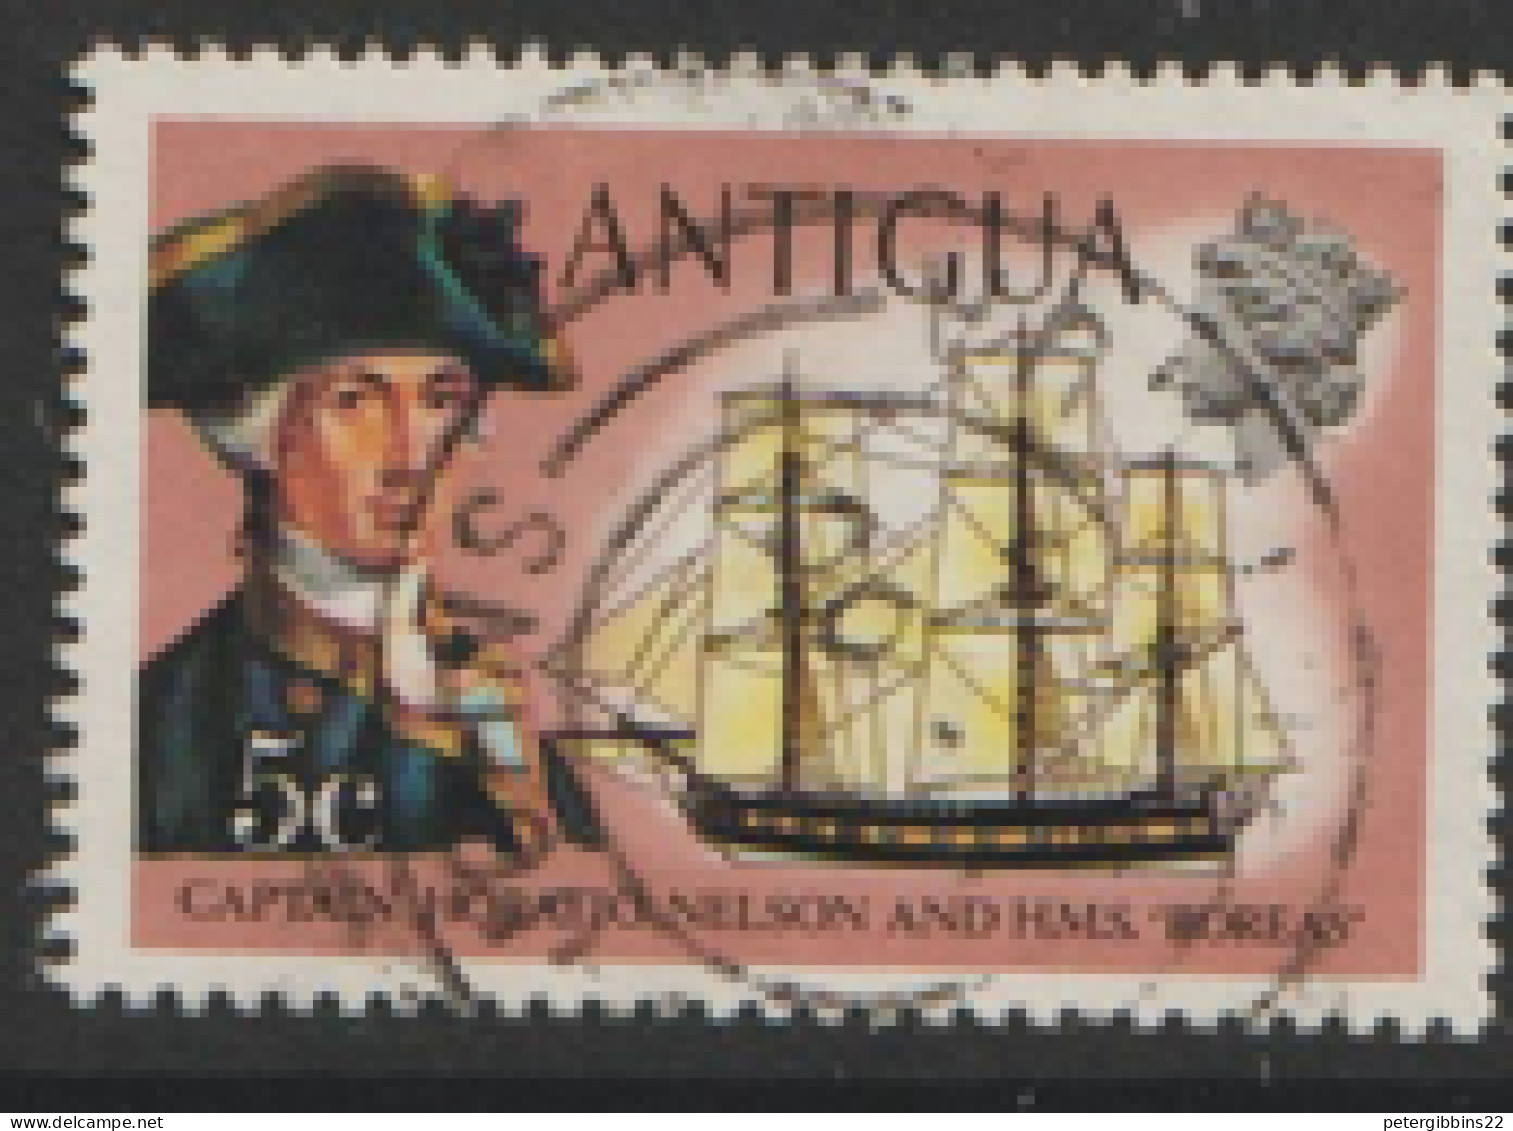 Antigua   1970   SG 274   5c  Nelson Fine Used - 1960-1981 Ministerial Government